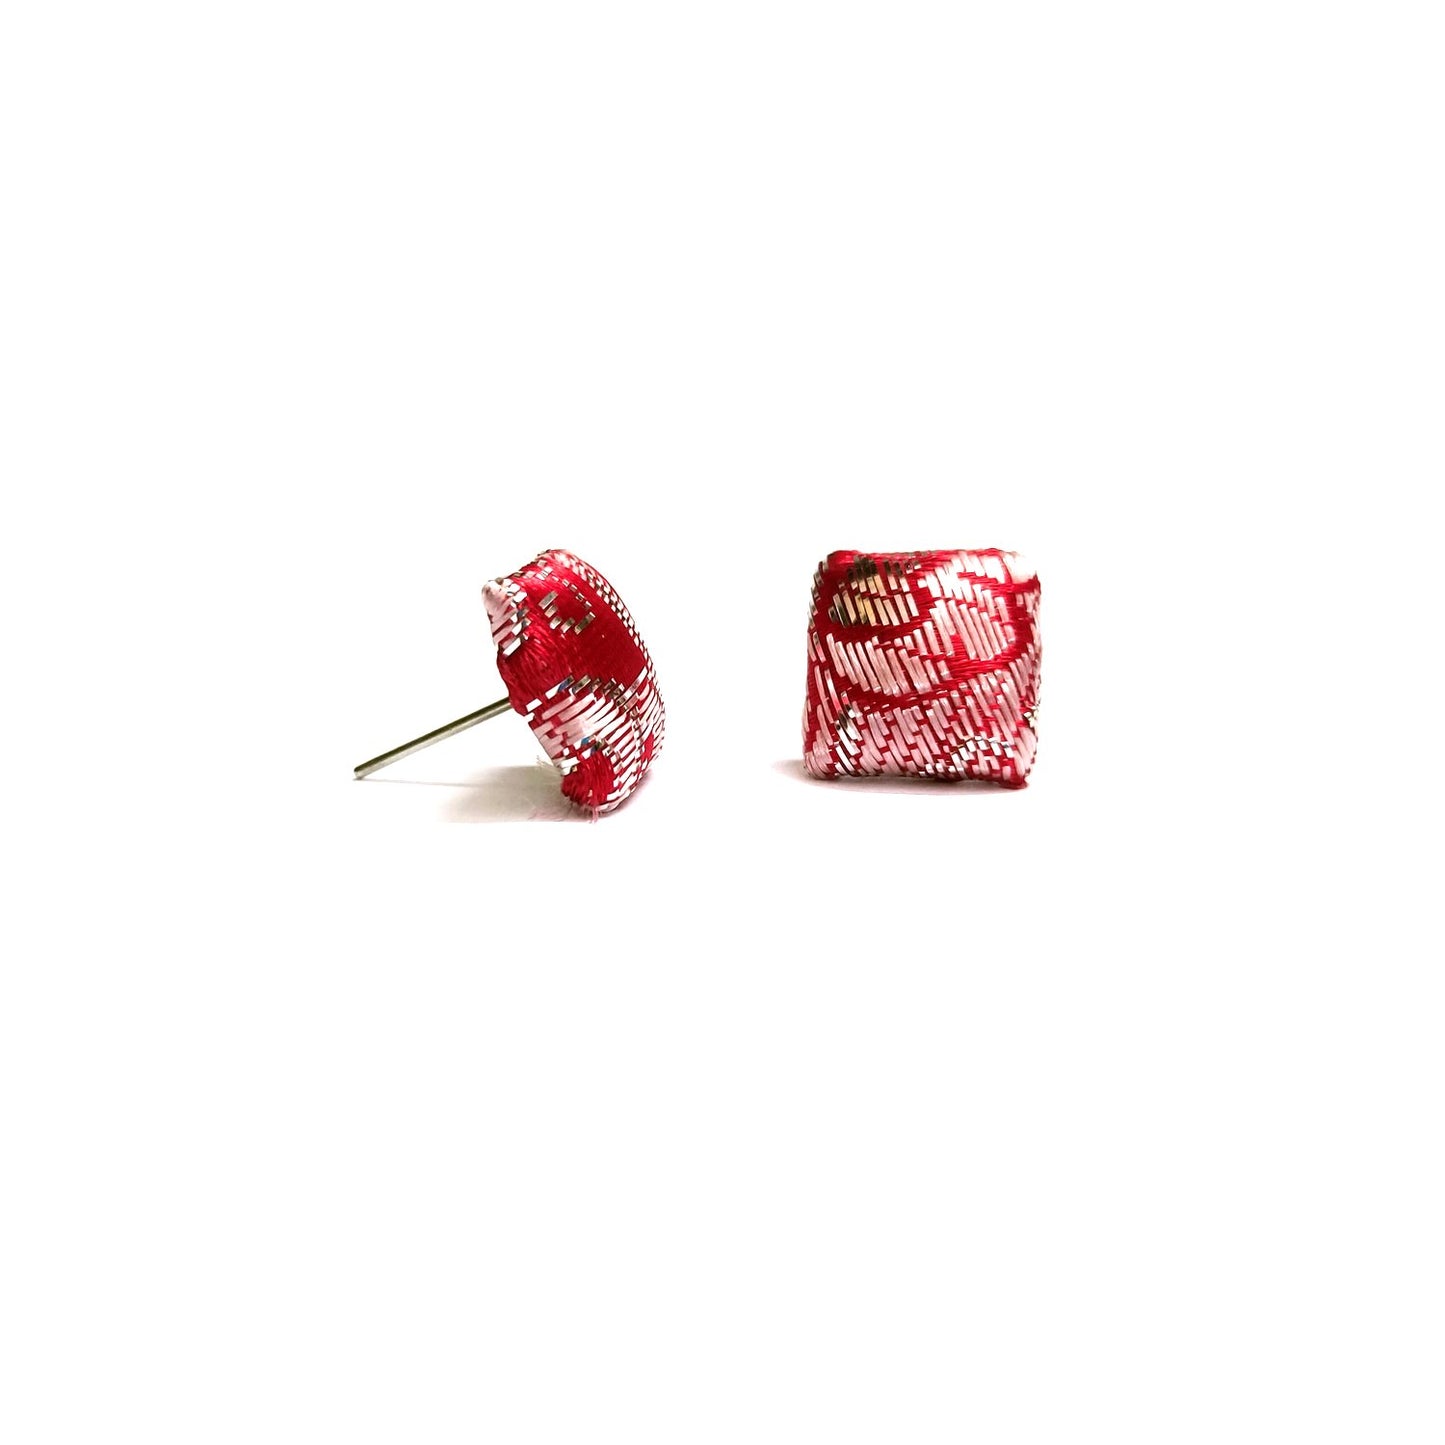 Anokhi Ada Fancy Small Square Shaped Stud Earrings for Girls ( Red, AS-09C )